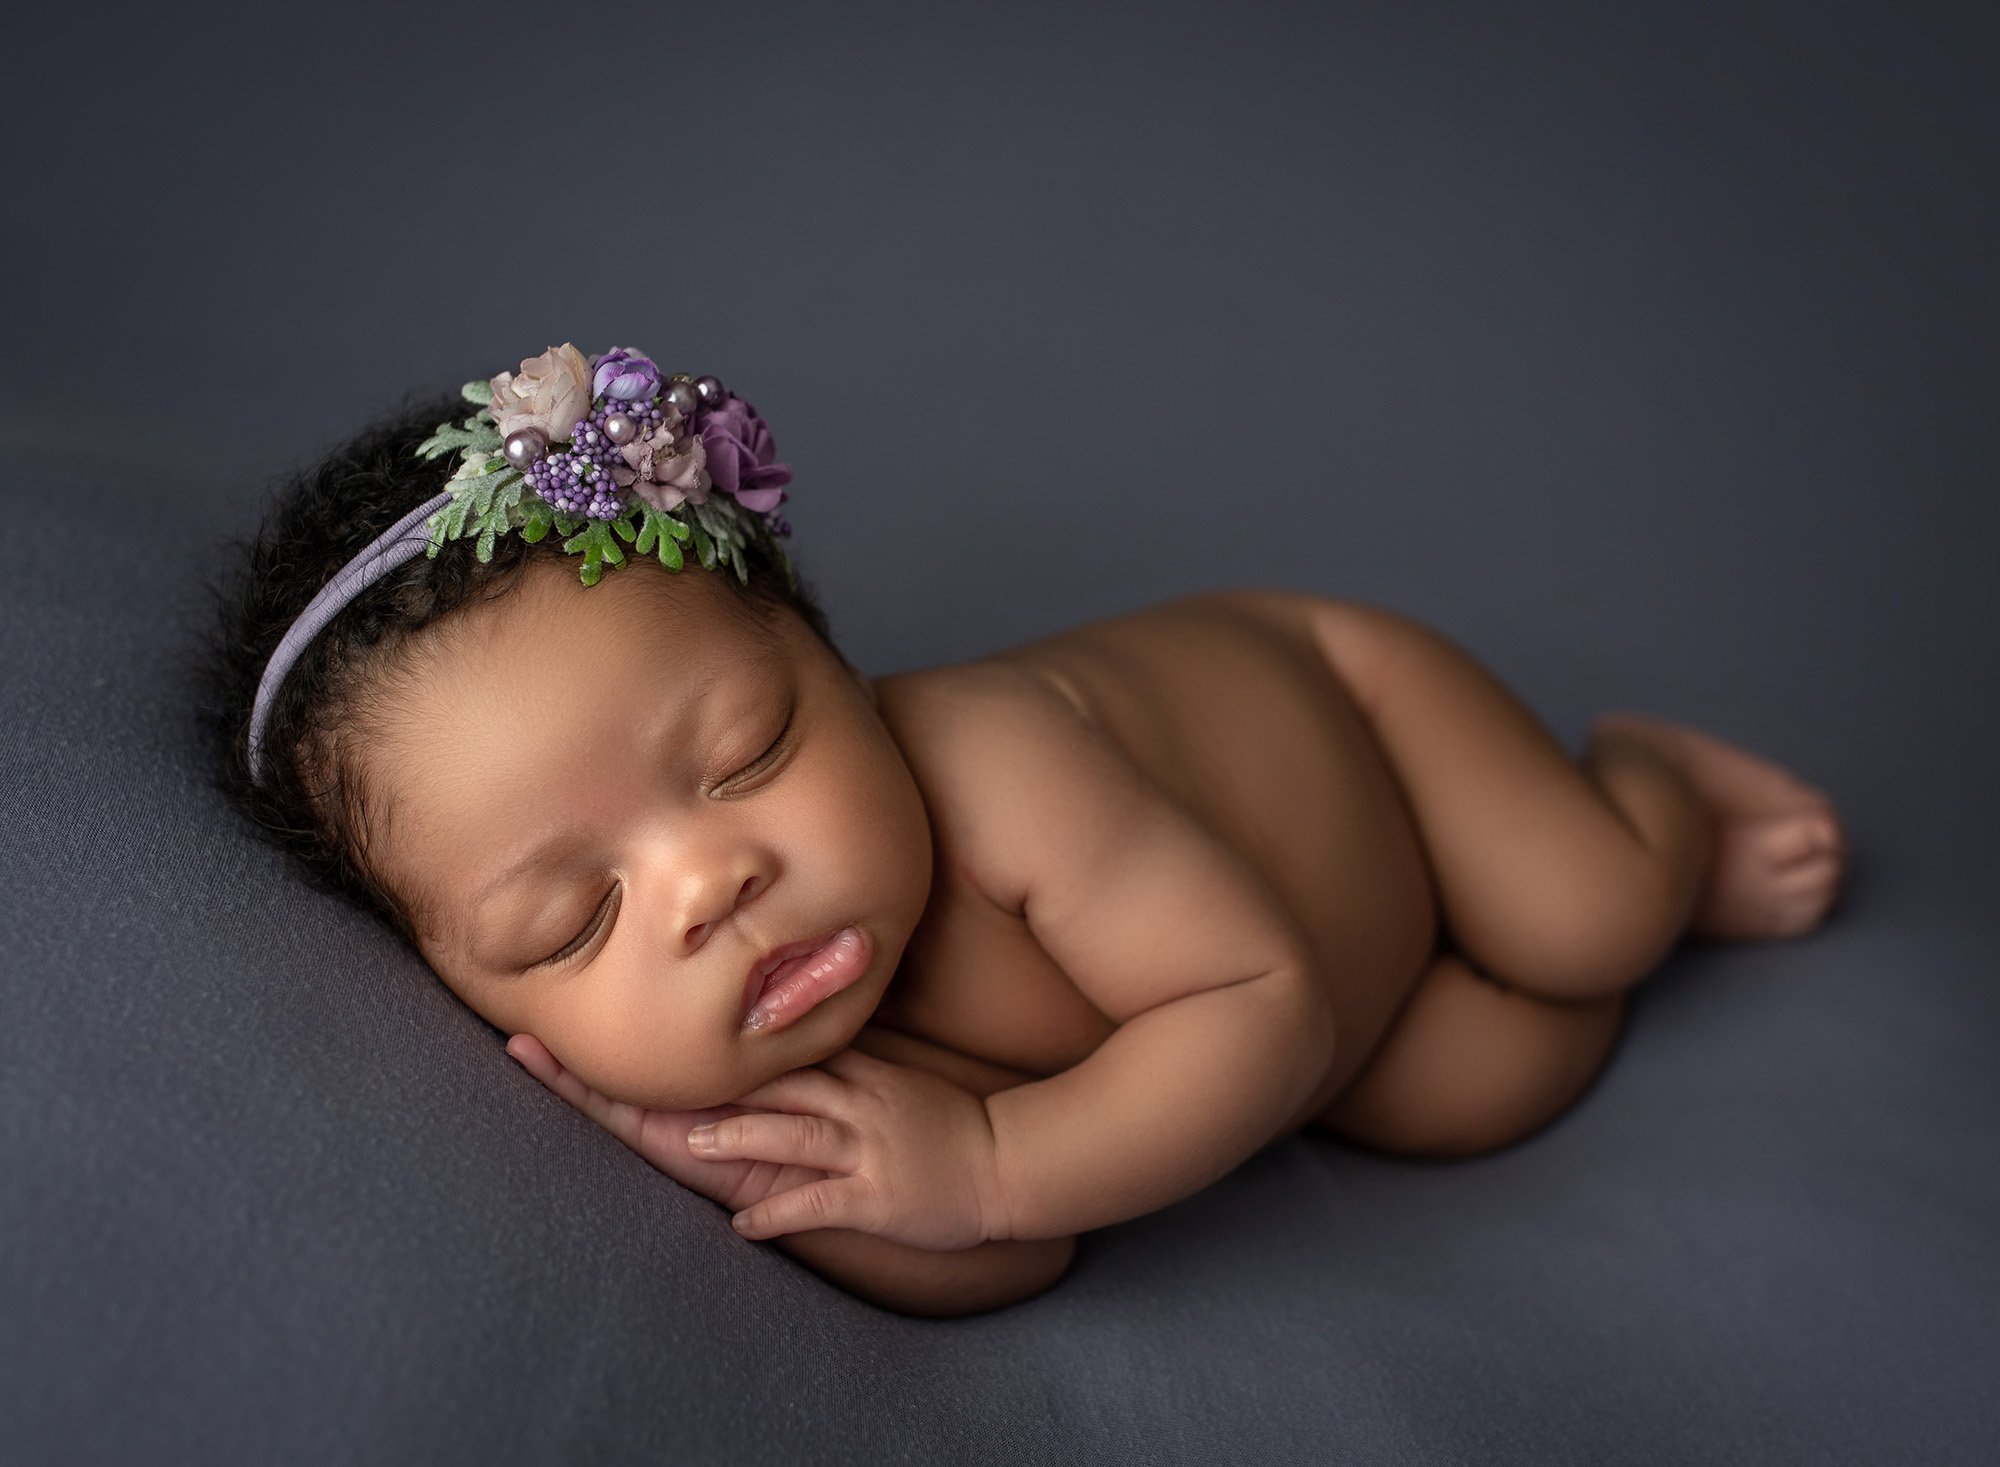 Best age for newborn photos naked baby girl laying on her side with a purple floral headband and her hands under her cheek